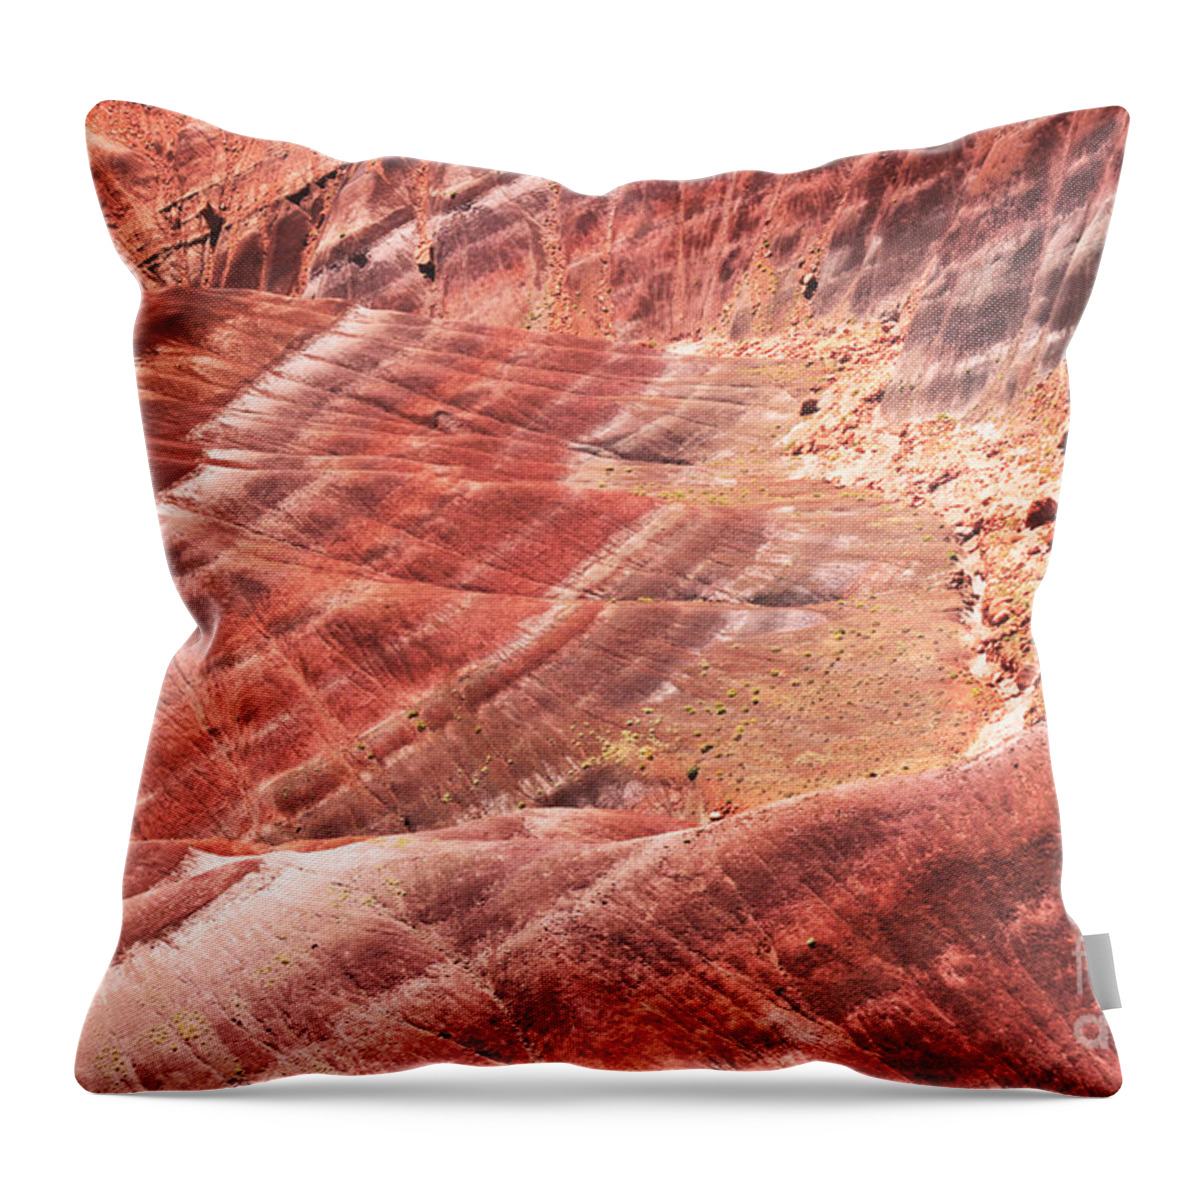 Red Rocks Throw Pillow featuring the photograph Soaring by Phil Cappiali Jr